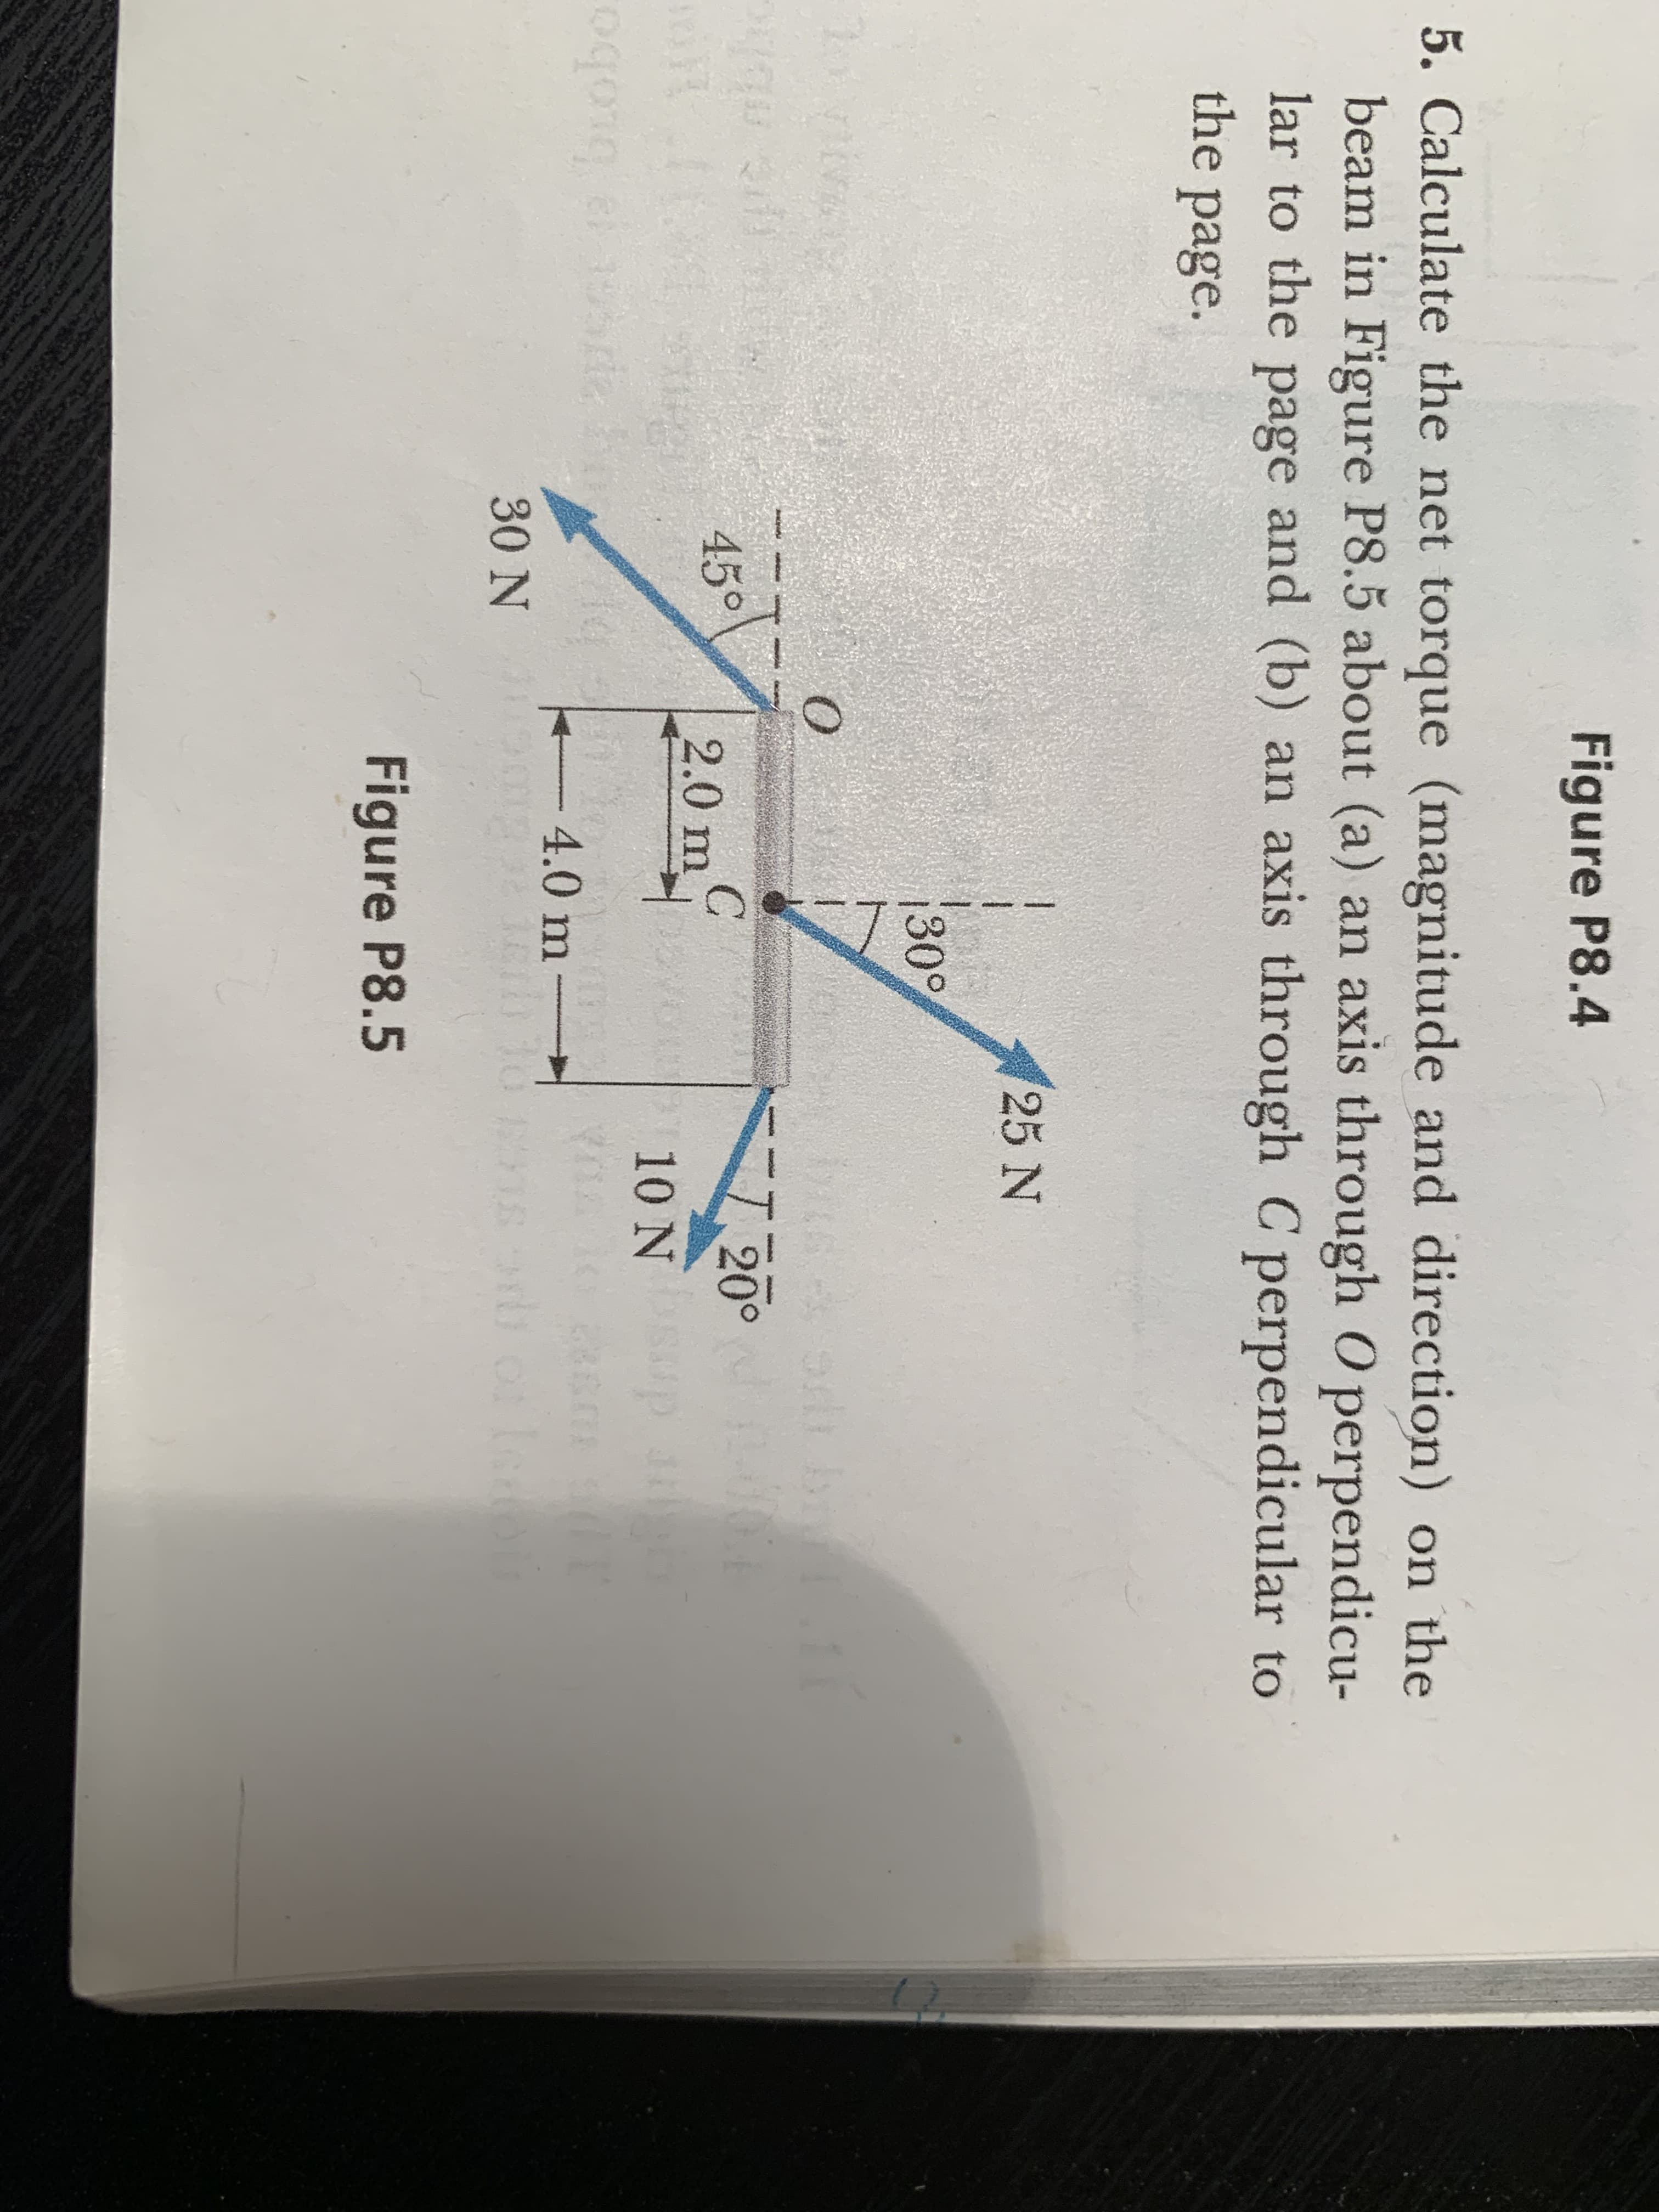 5. Calculate the net torque (magnitude and direction) on the
beam in Figure P8.5 about (a) an axis through O perpendicu-
lar to the page and (b) an axis through C perpendicular to
the page.
